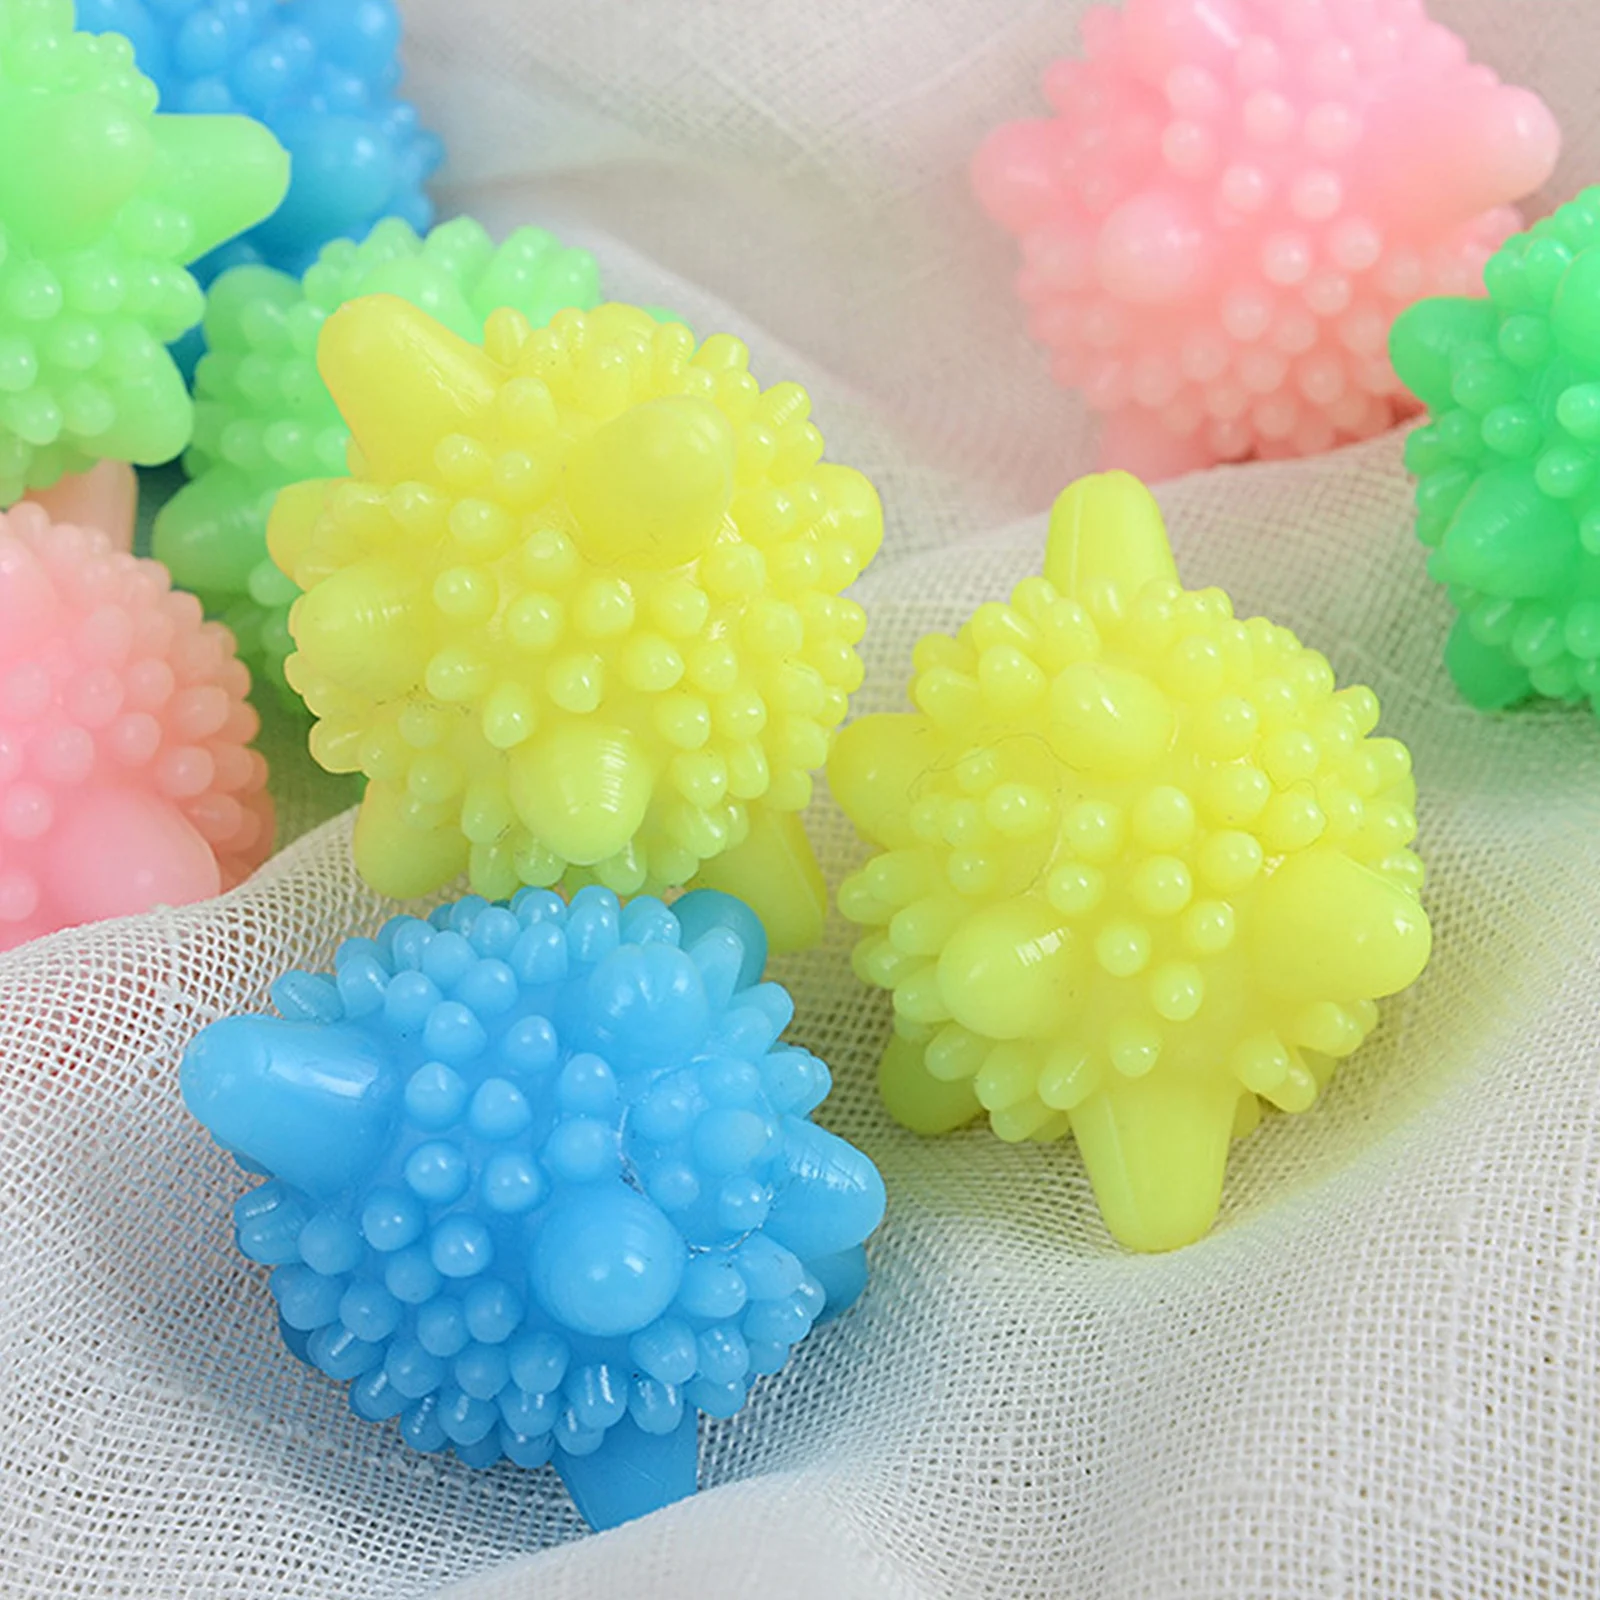 5PCs Magic Laundry Ball For Household Cleaning Washing Machine Clothes Softener Starfish Shape Solid Cleaning Balls about 4-5cm